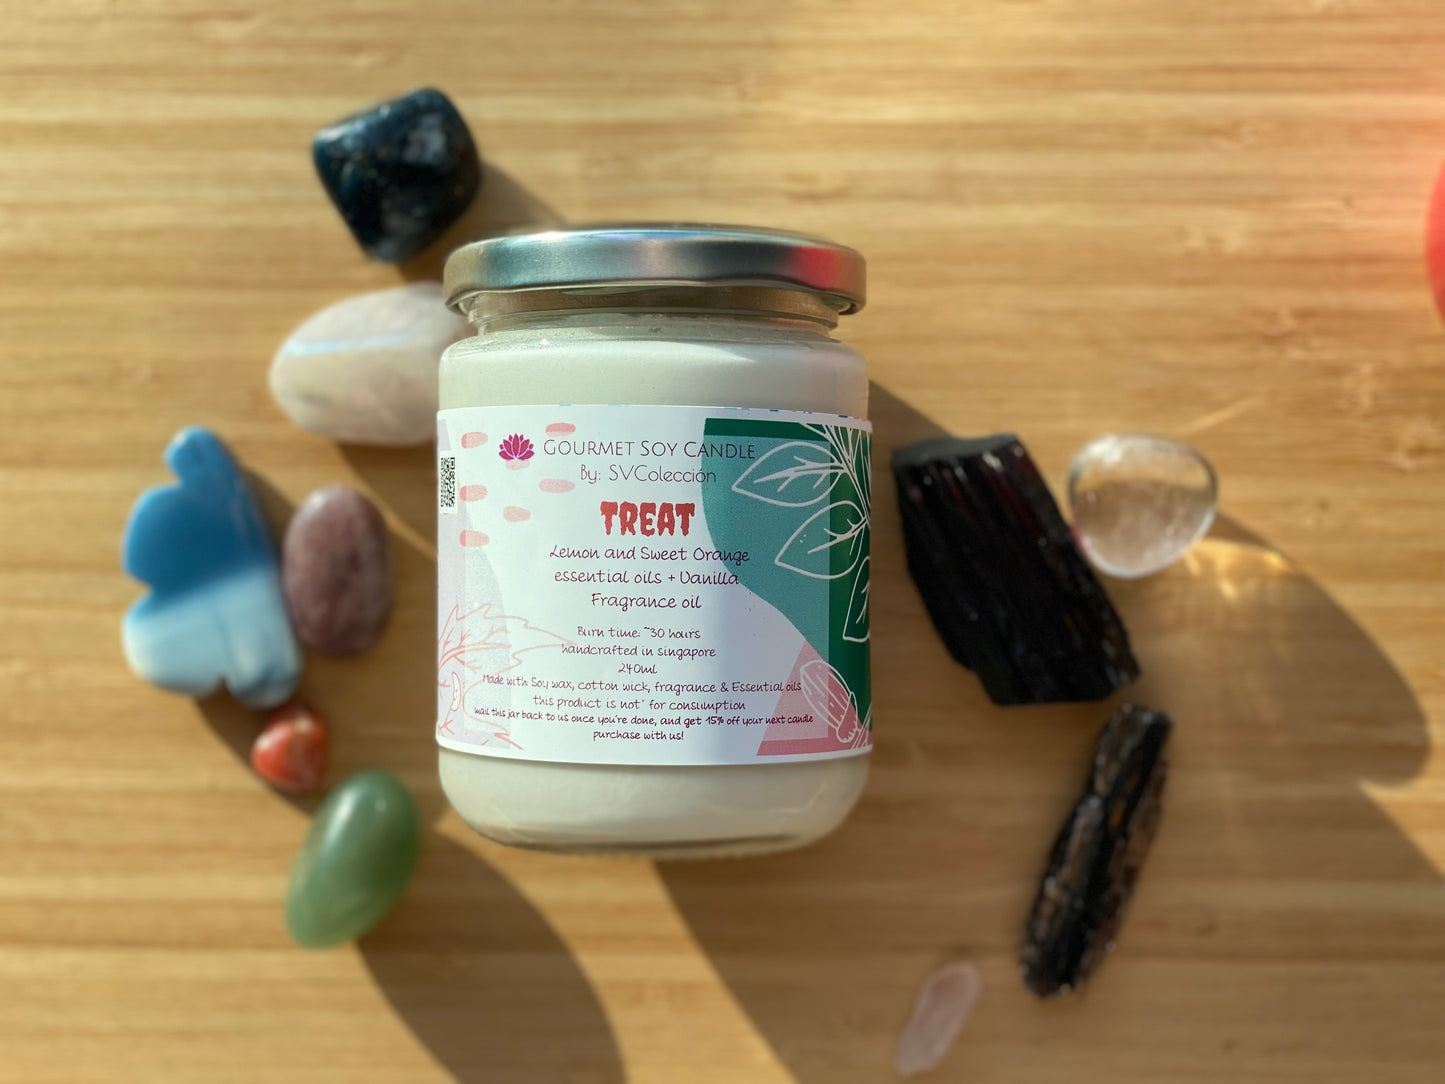 Gourmet Soy Candle - TREAT